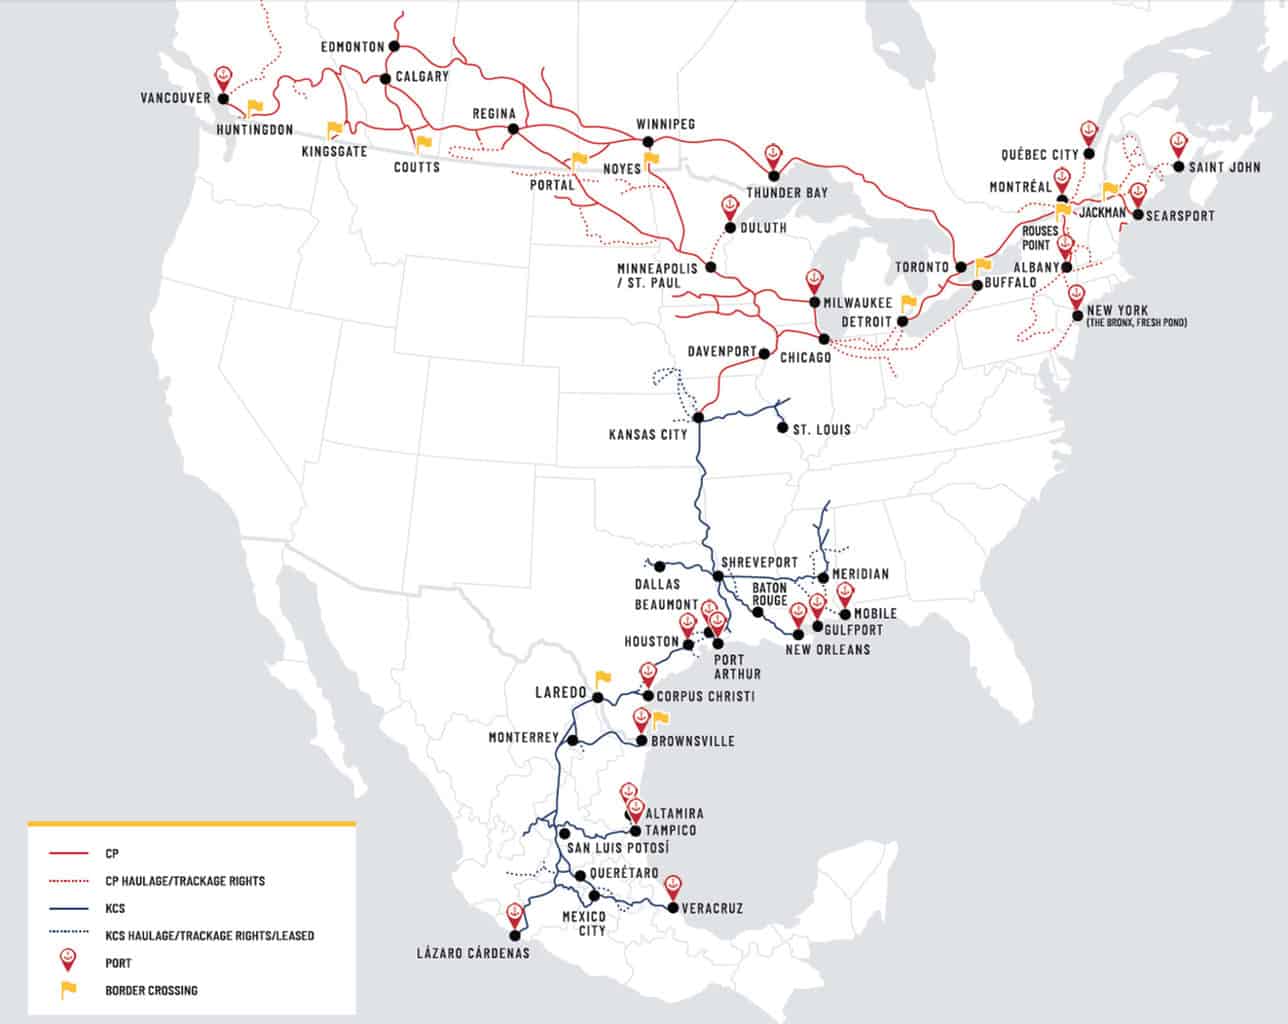 The map above shows the cities and ports in Canada, the US, and Mexico that will be served by the Canadian Pacific - Kansas City Southern rail merger. The combined network will join inland farmers and manufacturers in three nations to four important bodies of water: Pacific, Atlantic, Gulf Coast, and the Great Lakes / St. Lawrence Seaway.